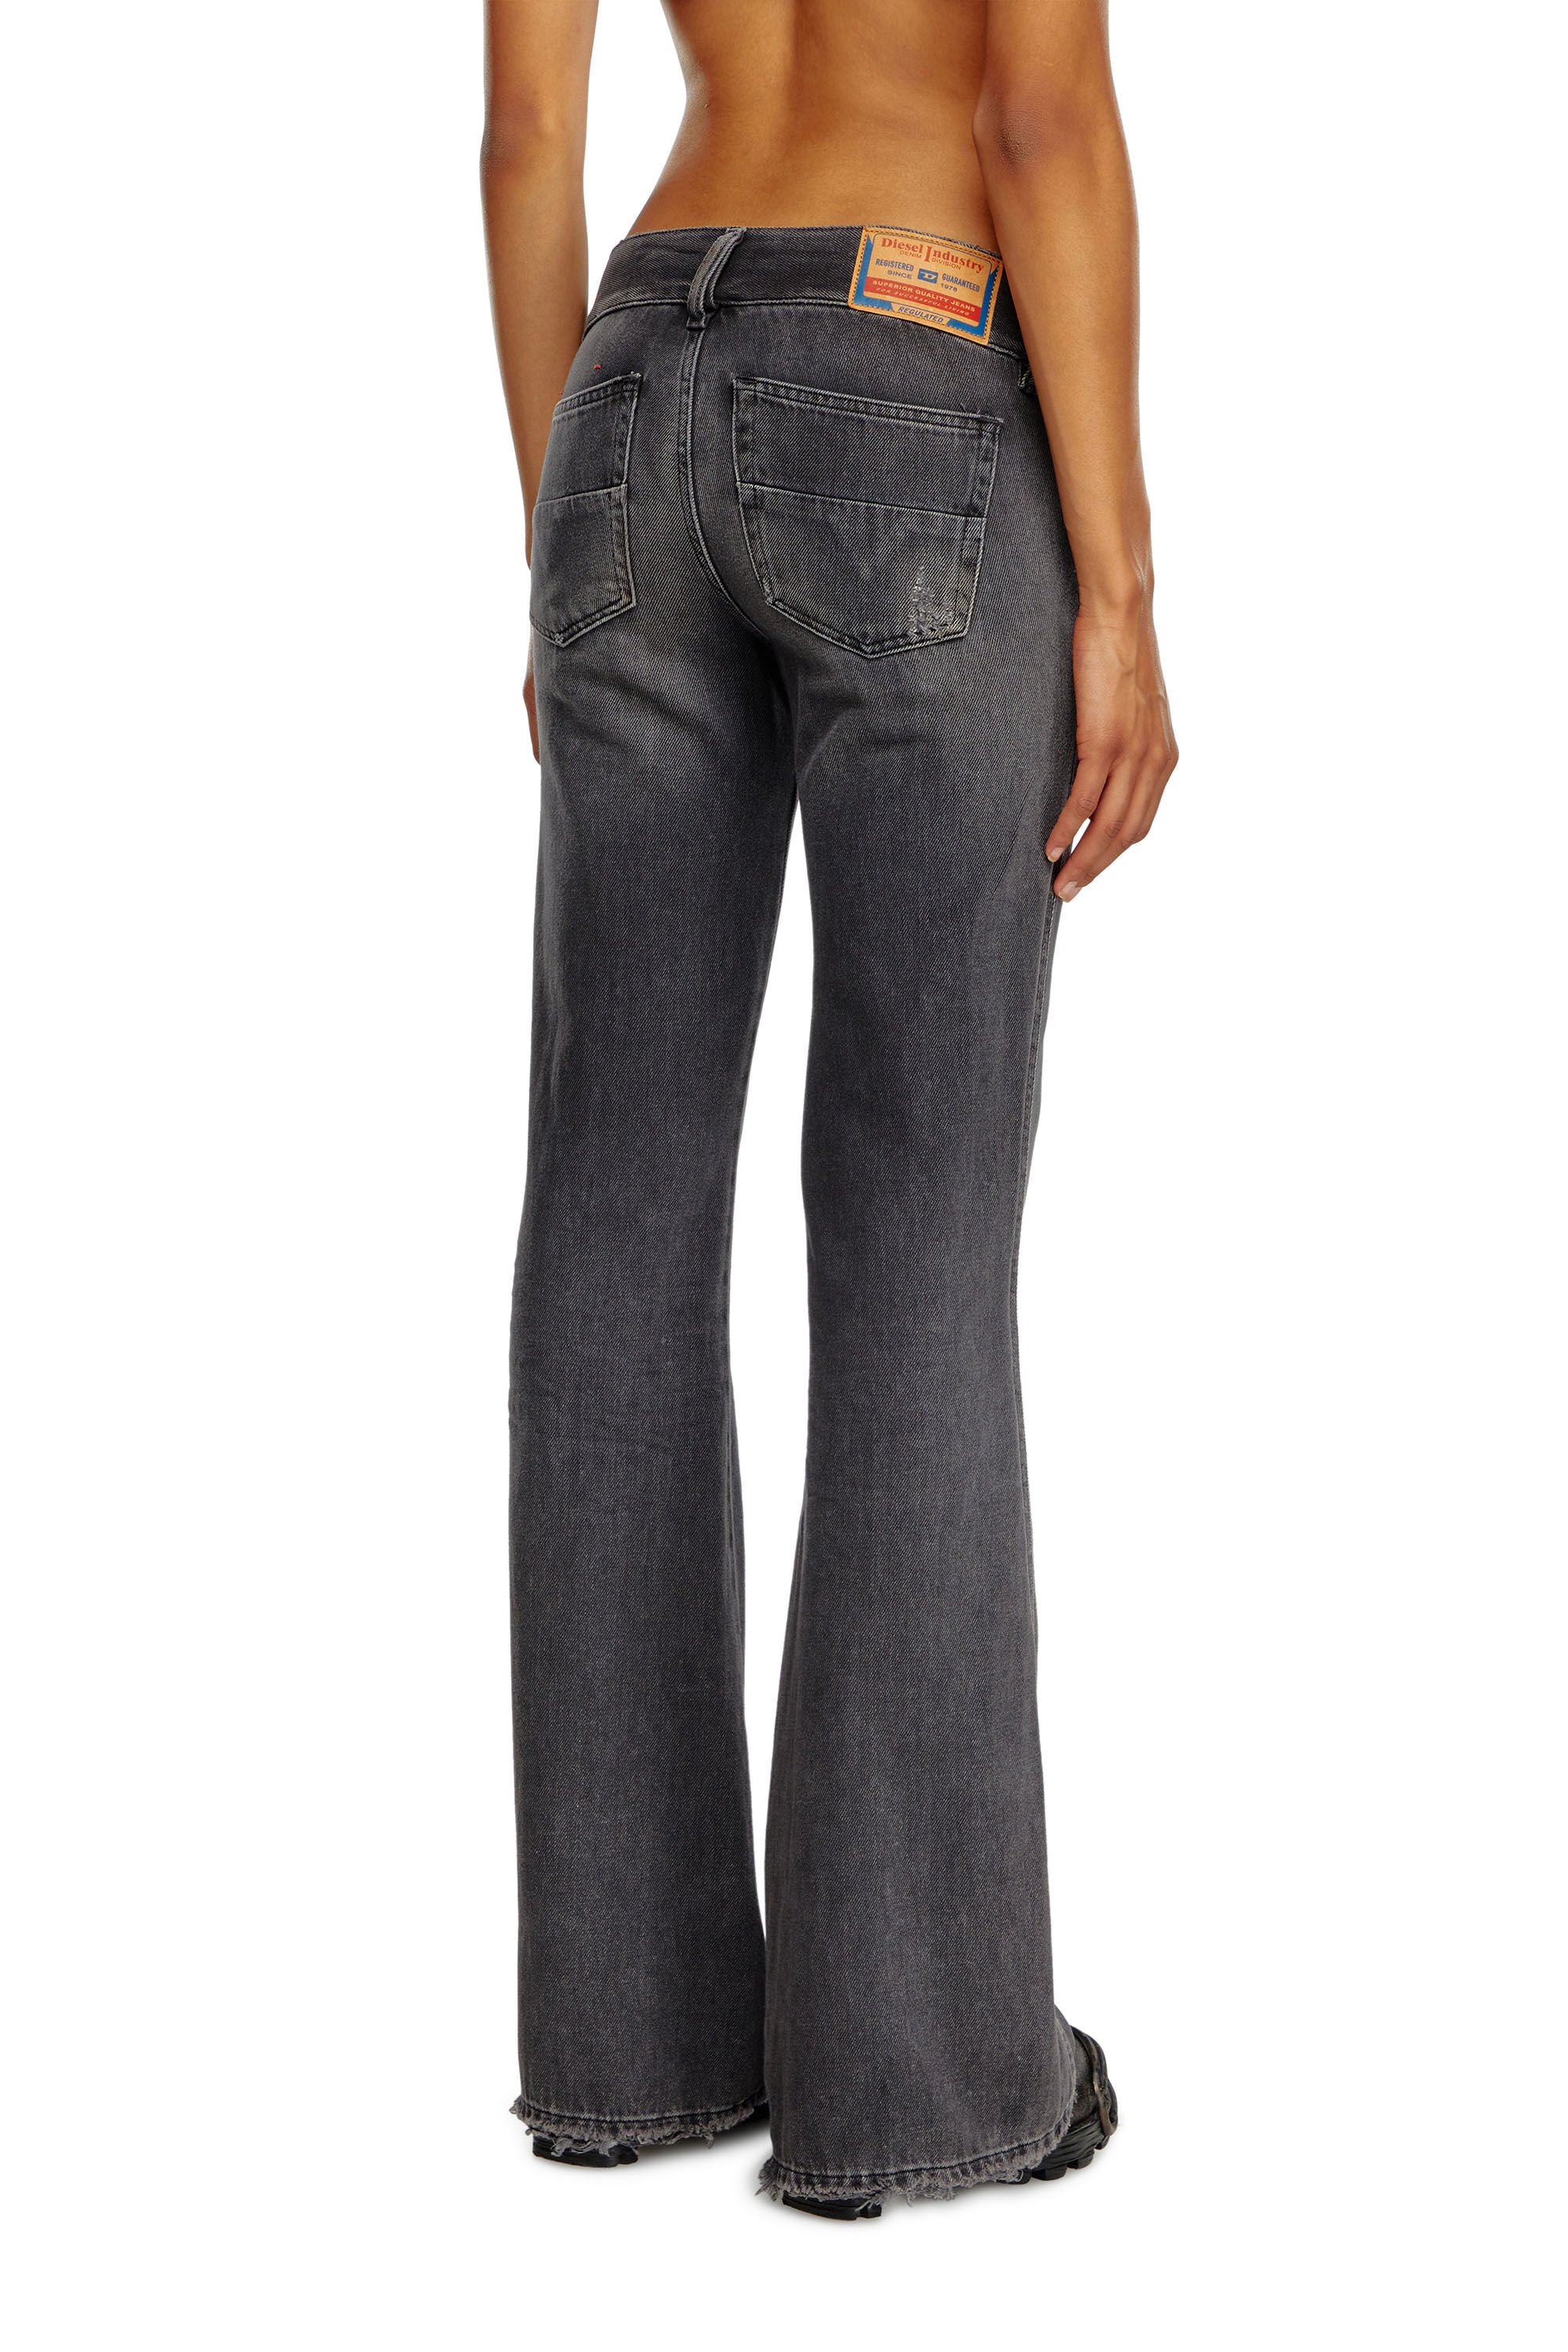 Diesel - Bootcut and Flare Jeans D-Hush 09K14, Mujer Bootcut y Flare Jeans - D-Hush in Negro - Image 4